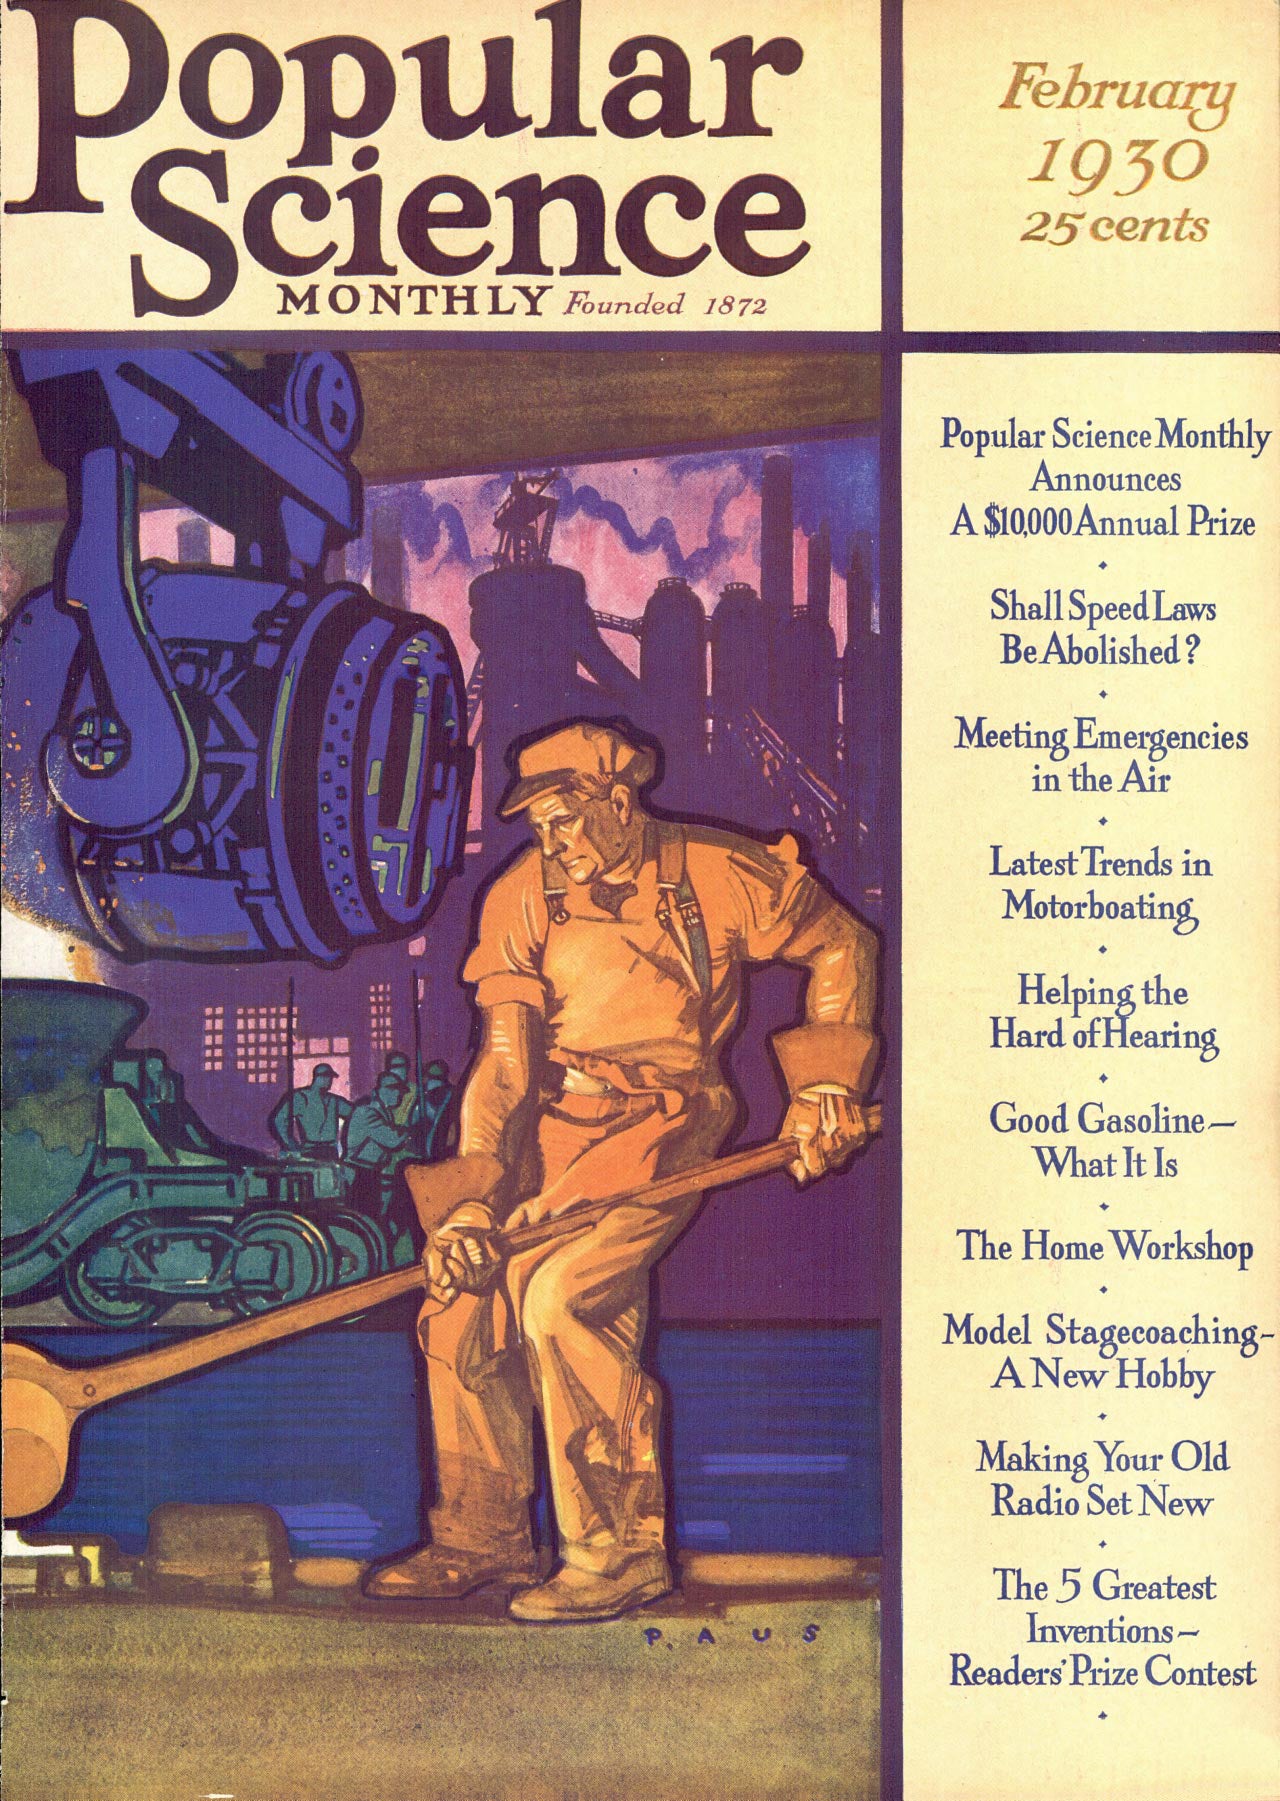 February 1930 cover of Popular Science magazine 